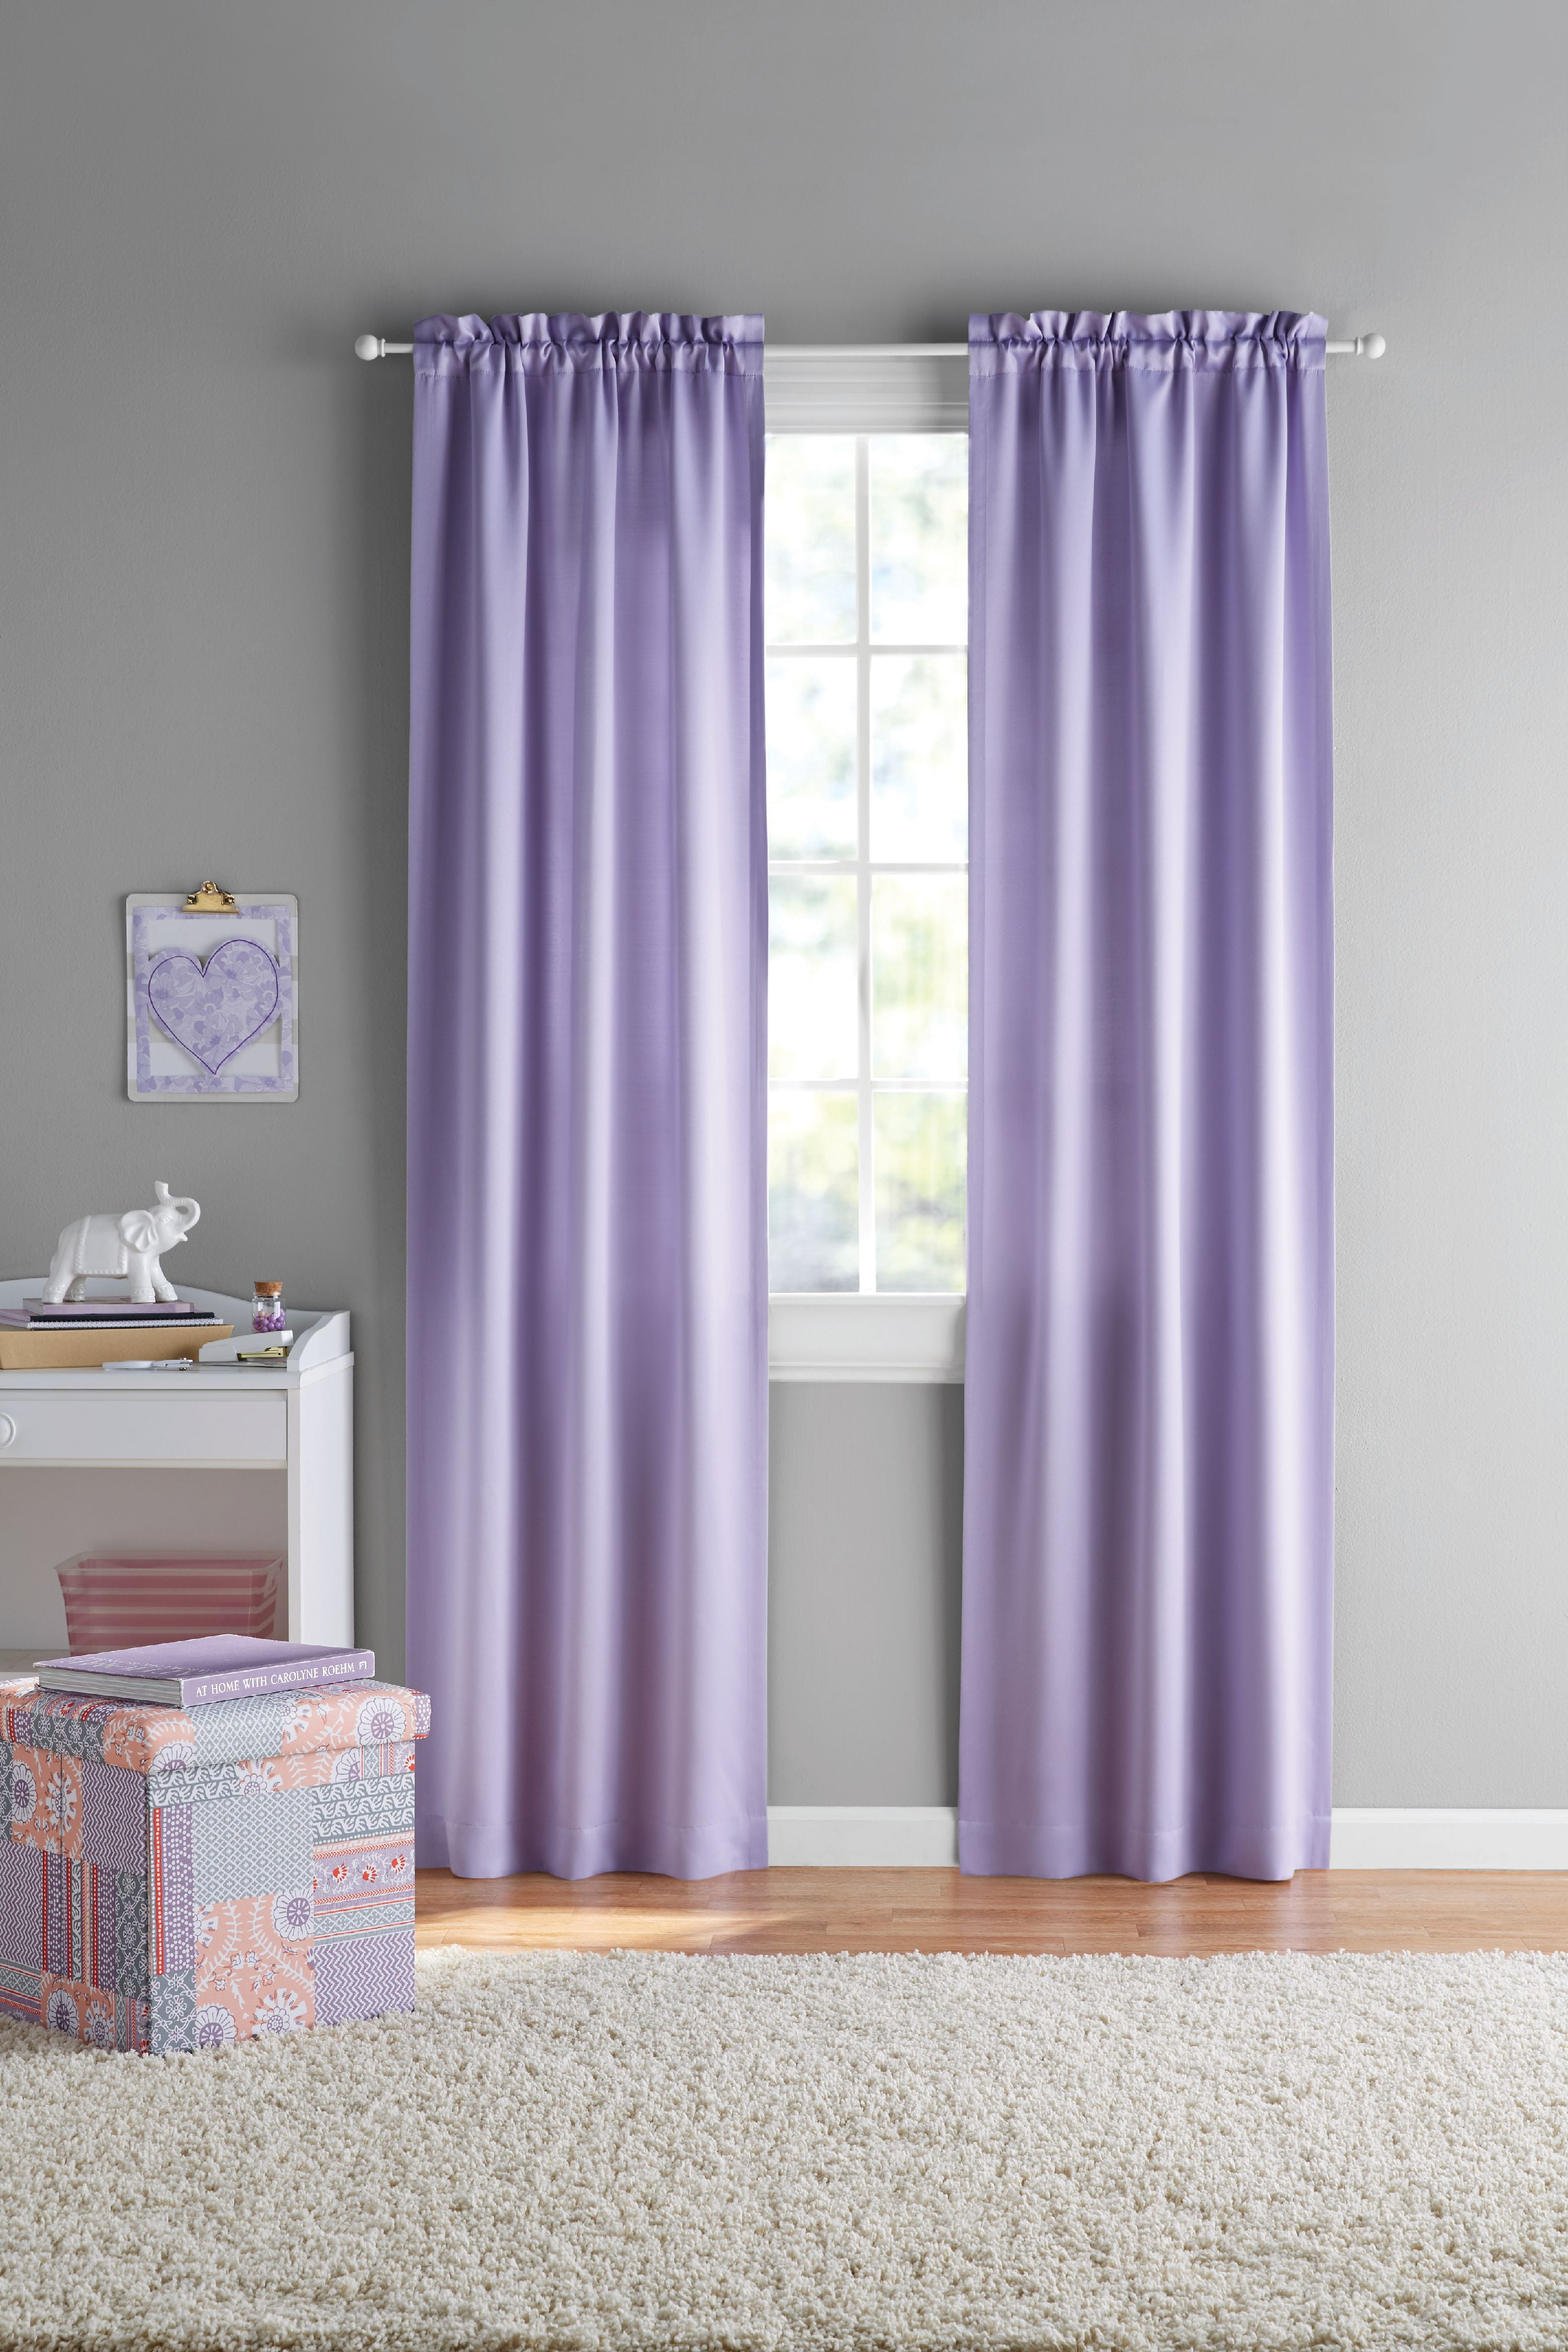 Your Zone Solid Color Room Darkening Rod Pocket Curtain Panel Pair, Set of 2, Purple, 30 x 63